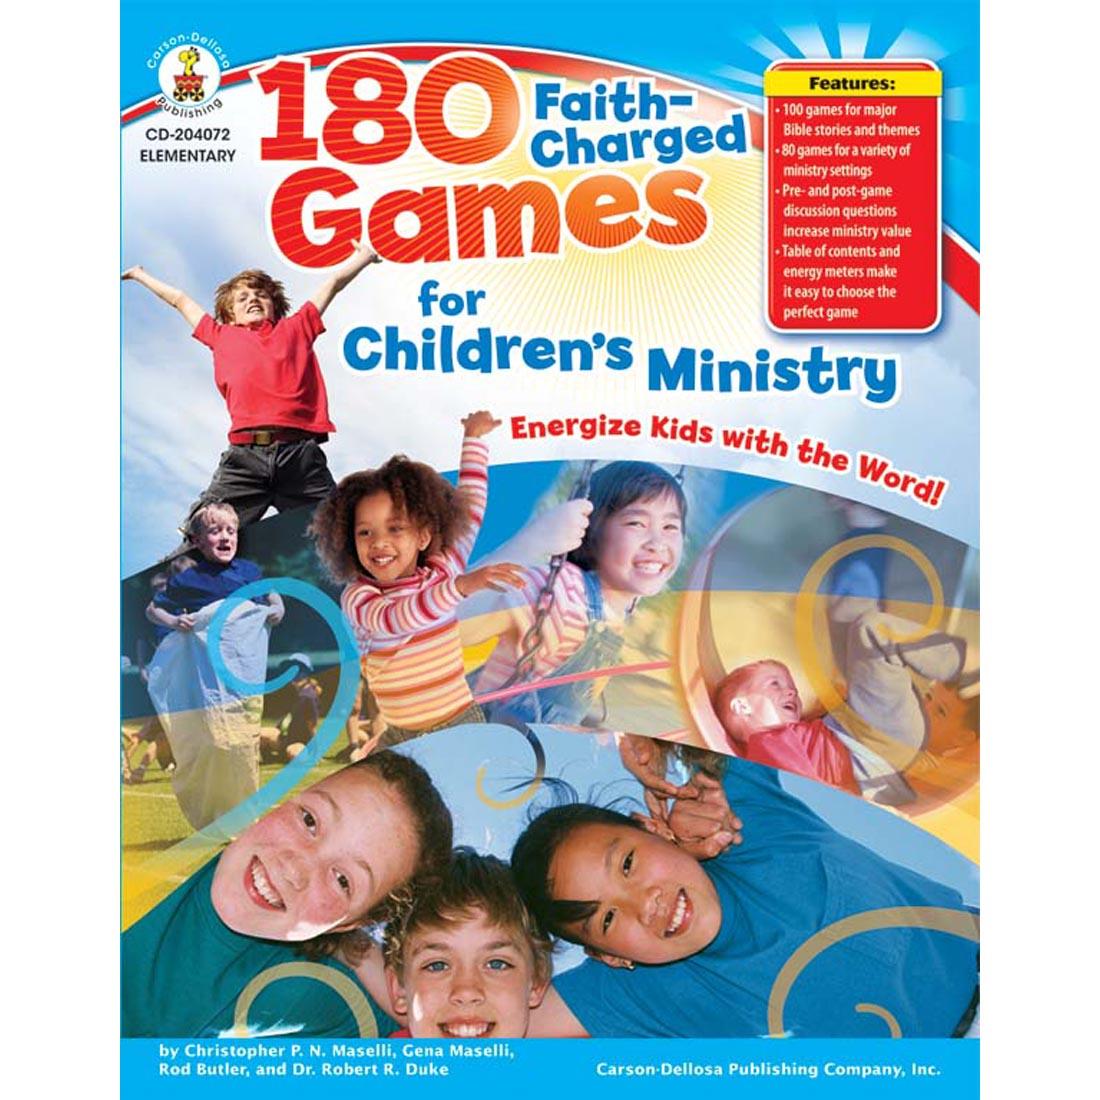 180 Faith-Charged Games for Children's Ministry by Carson Dellosa